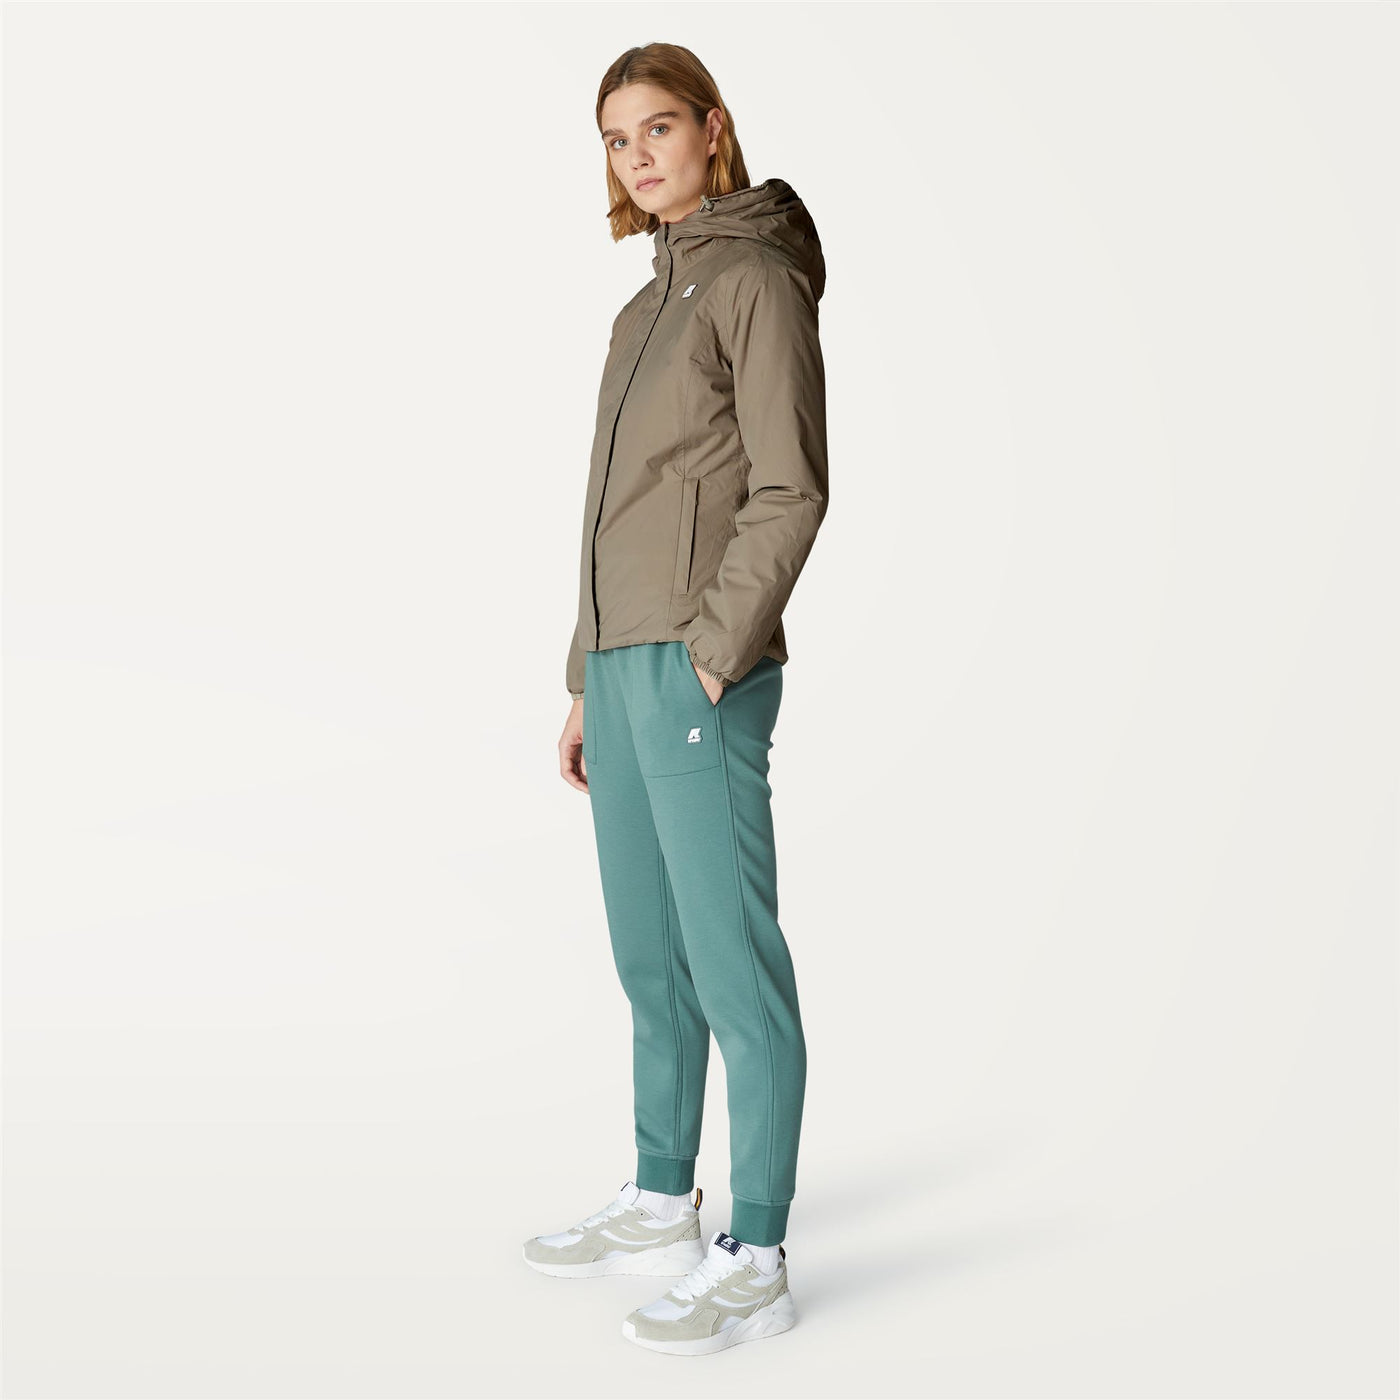 Jackets Woman LILY MICRO RIPSTOP MARMOTTA Short BEIGE TAUPE - GREY Detail (jpg Rgb)			